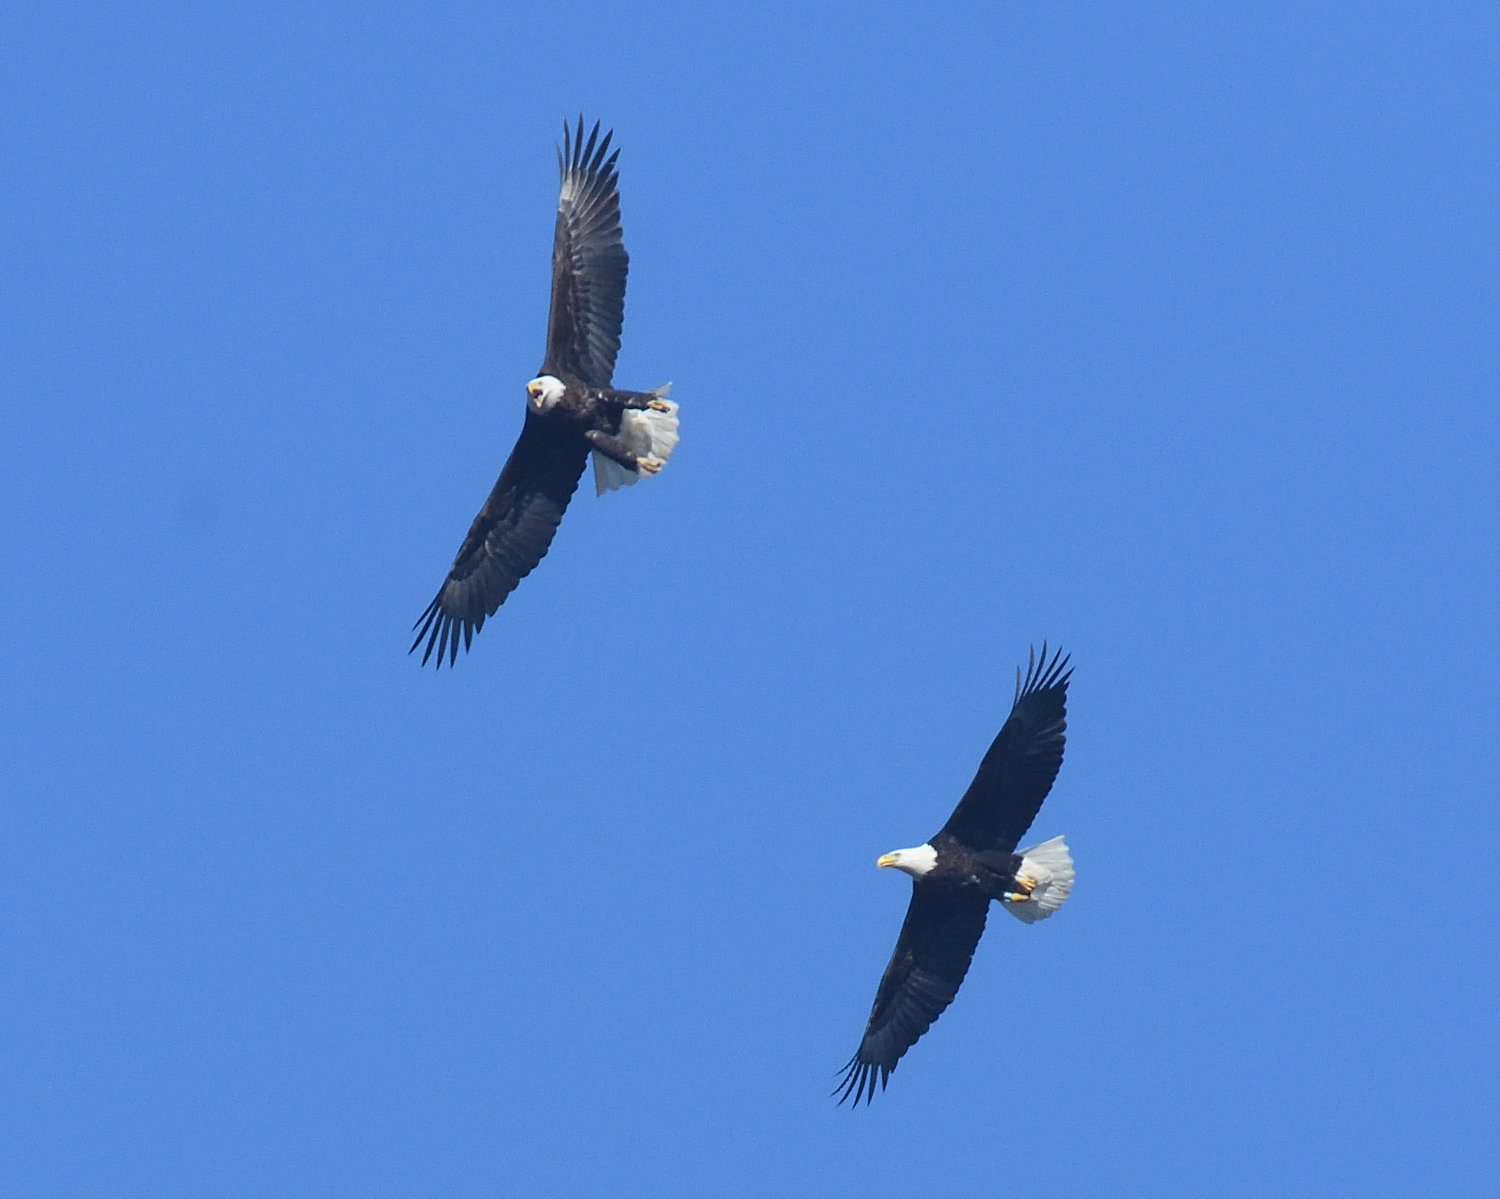 This is another pair of eagles seen that were flying in formation. Notice that the eagle to the left has its legs down. Eagles usually do this to slow themselves down as they descend or to land. Many resident pairs were observed doing this together at this time of the year; it could be part of bonding behavior. The eagle to the lower right of the frame has a NYSDEC (New York State Department of Environmental Conservation) band on its right leg. One eagle at a nearby nest is known to be banded...